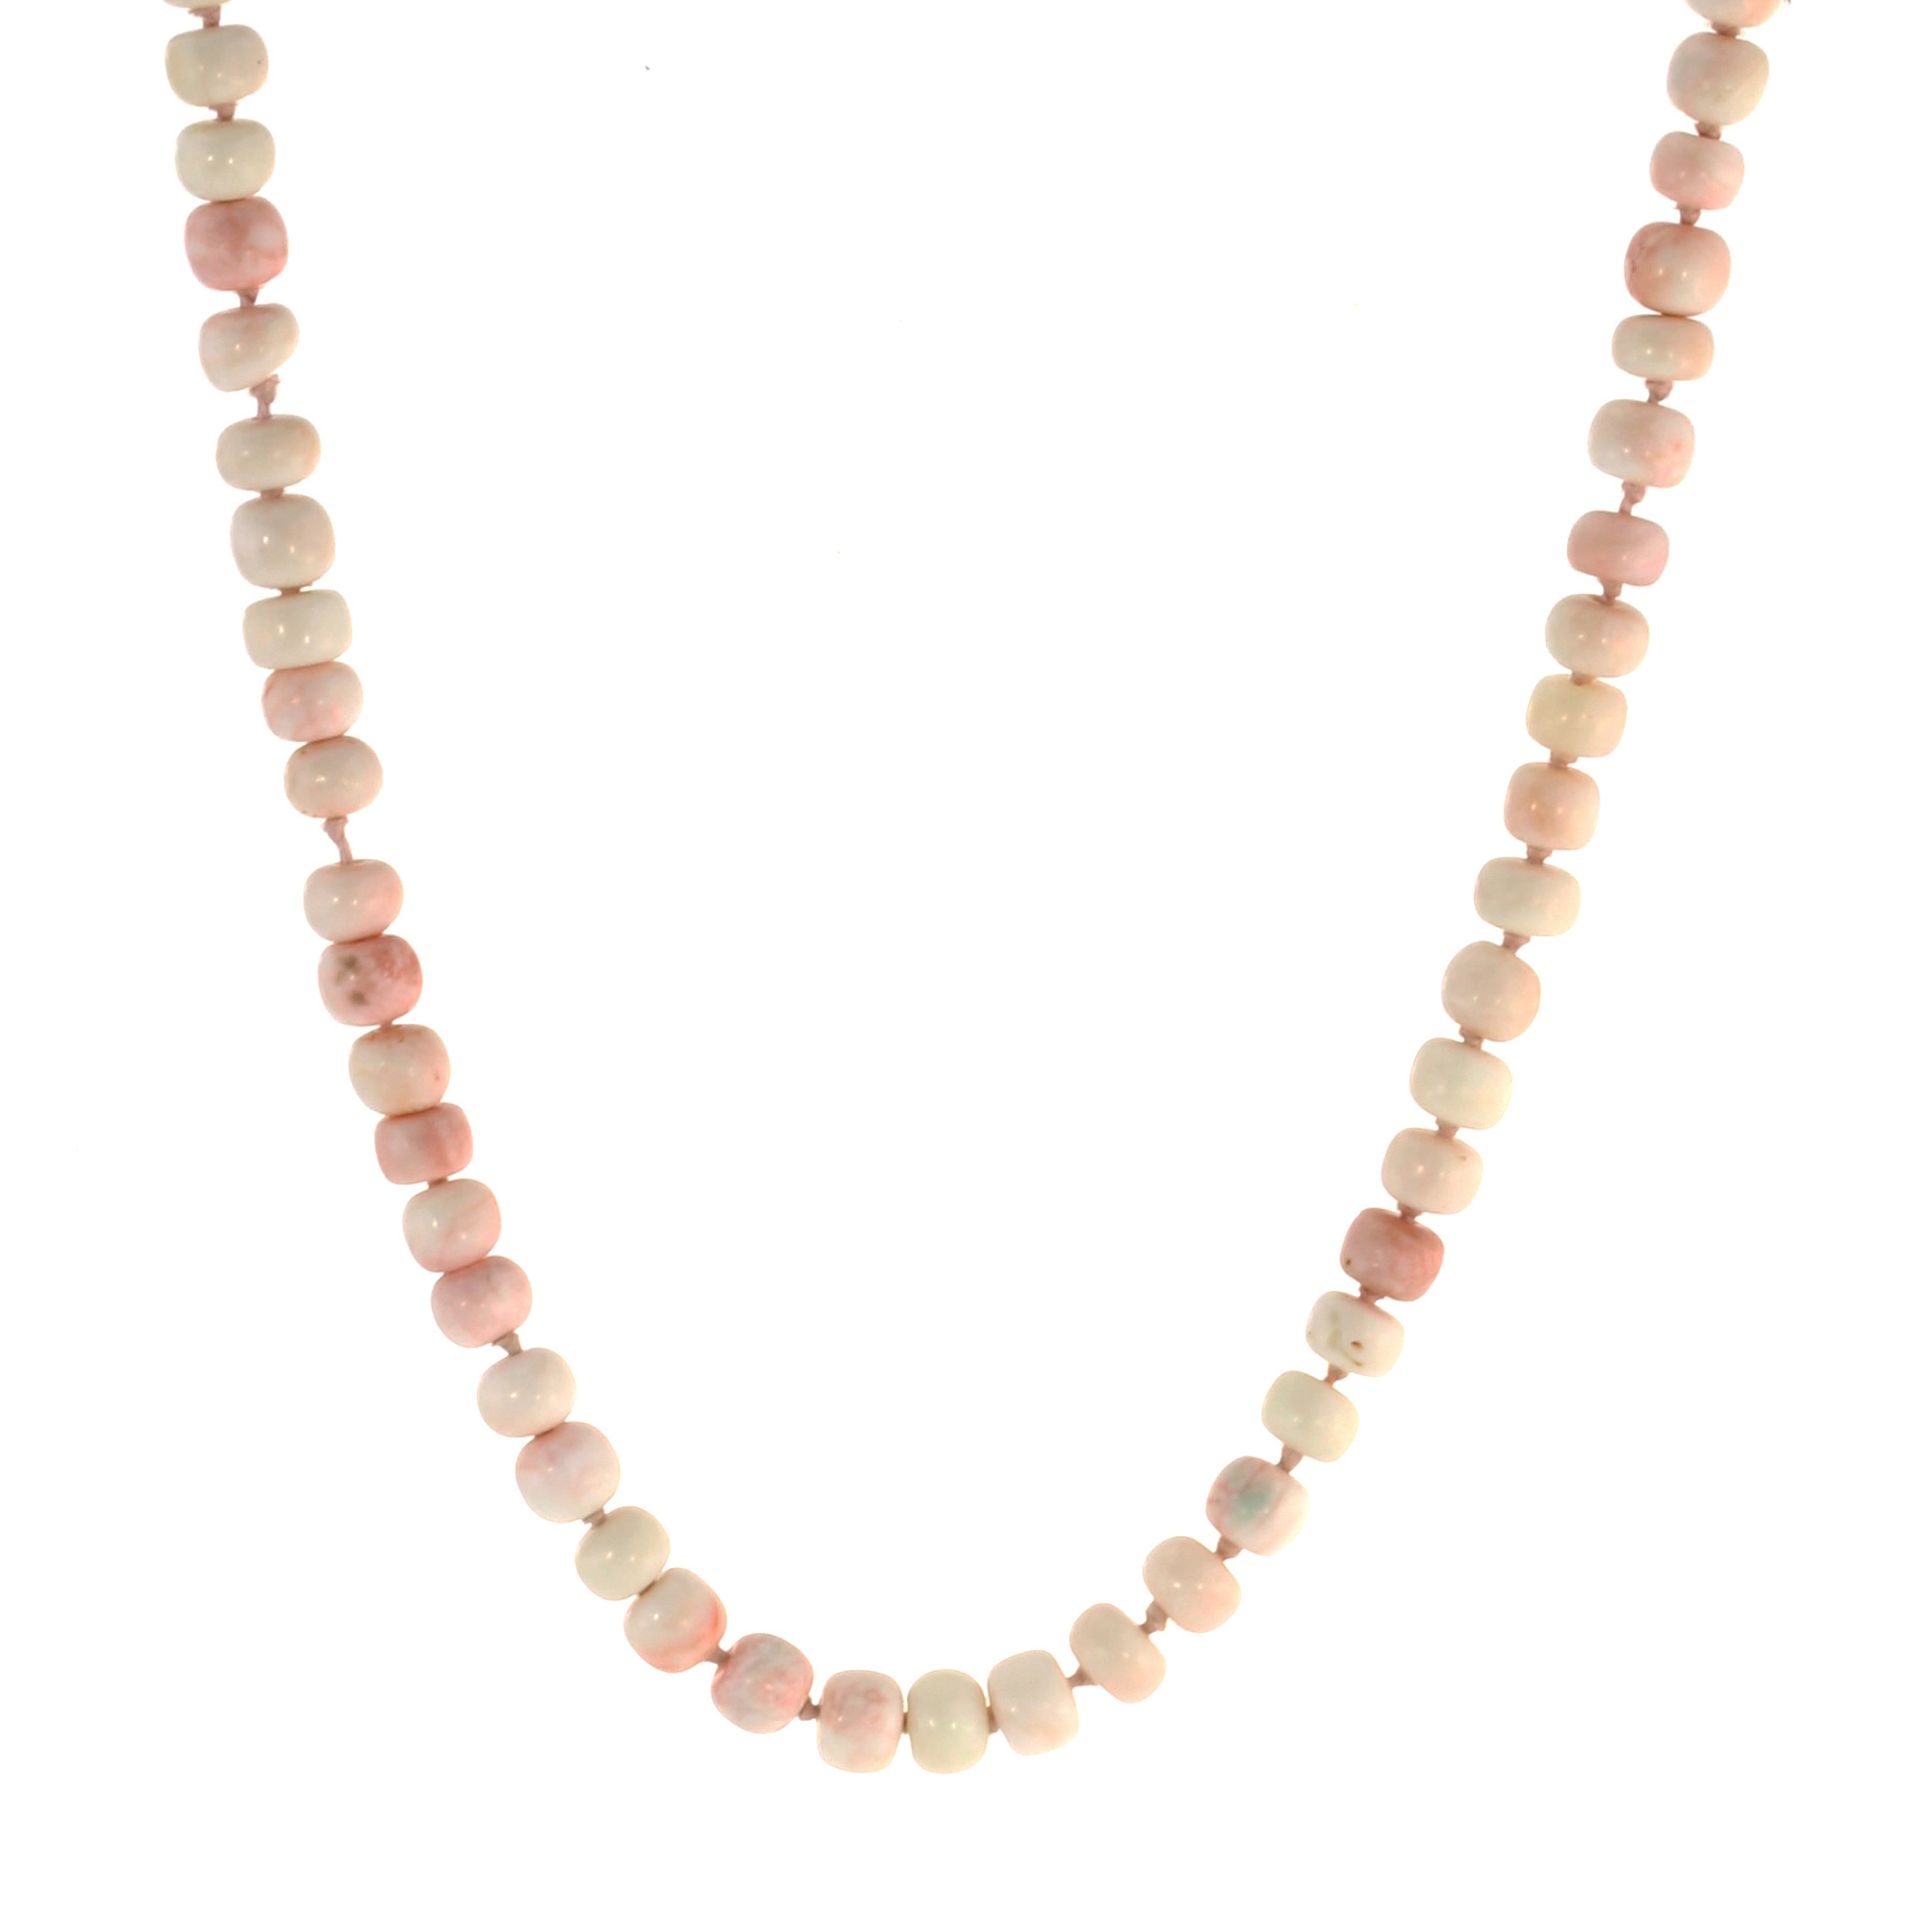 A CORAL BEAD NECKLACE comprising a single strand of eighty four polished coral beads, length 460mm.